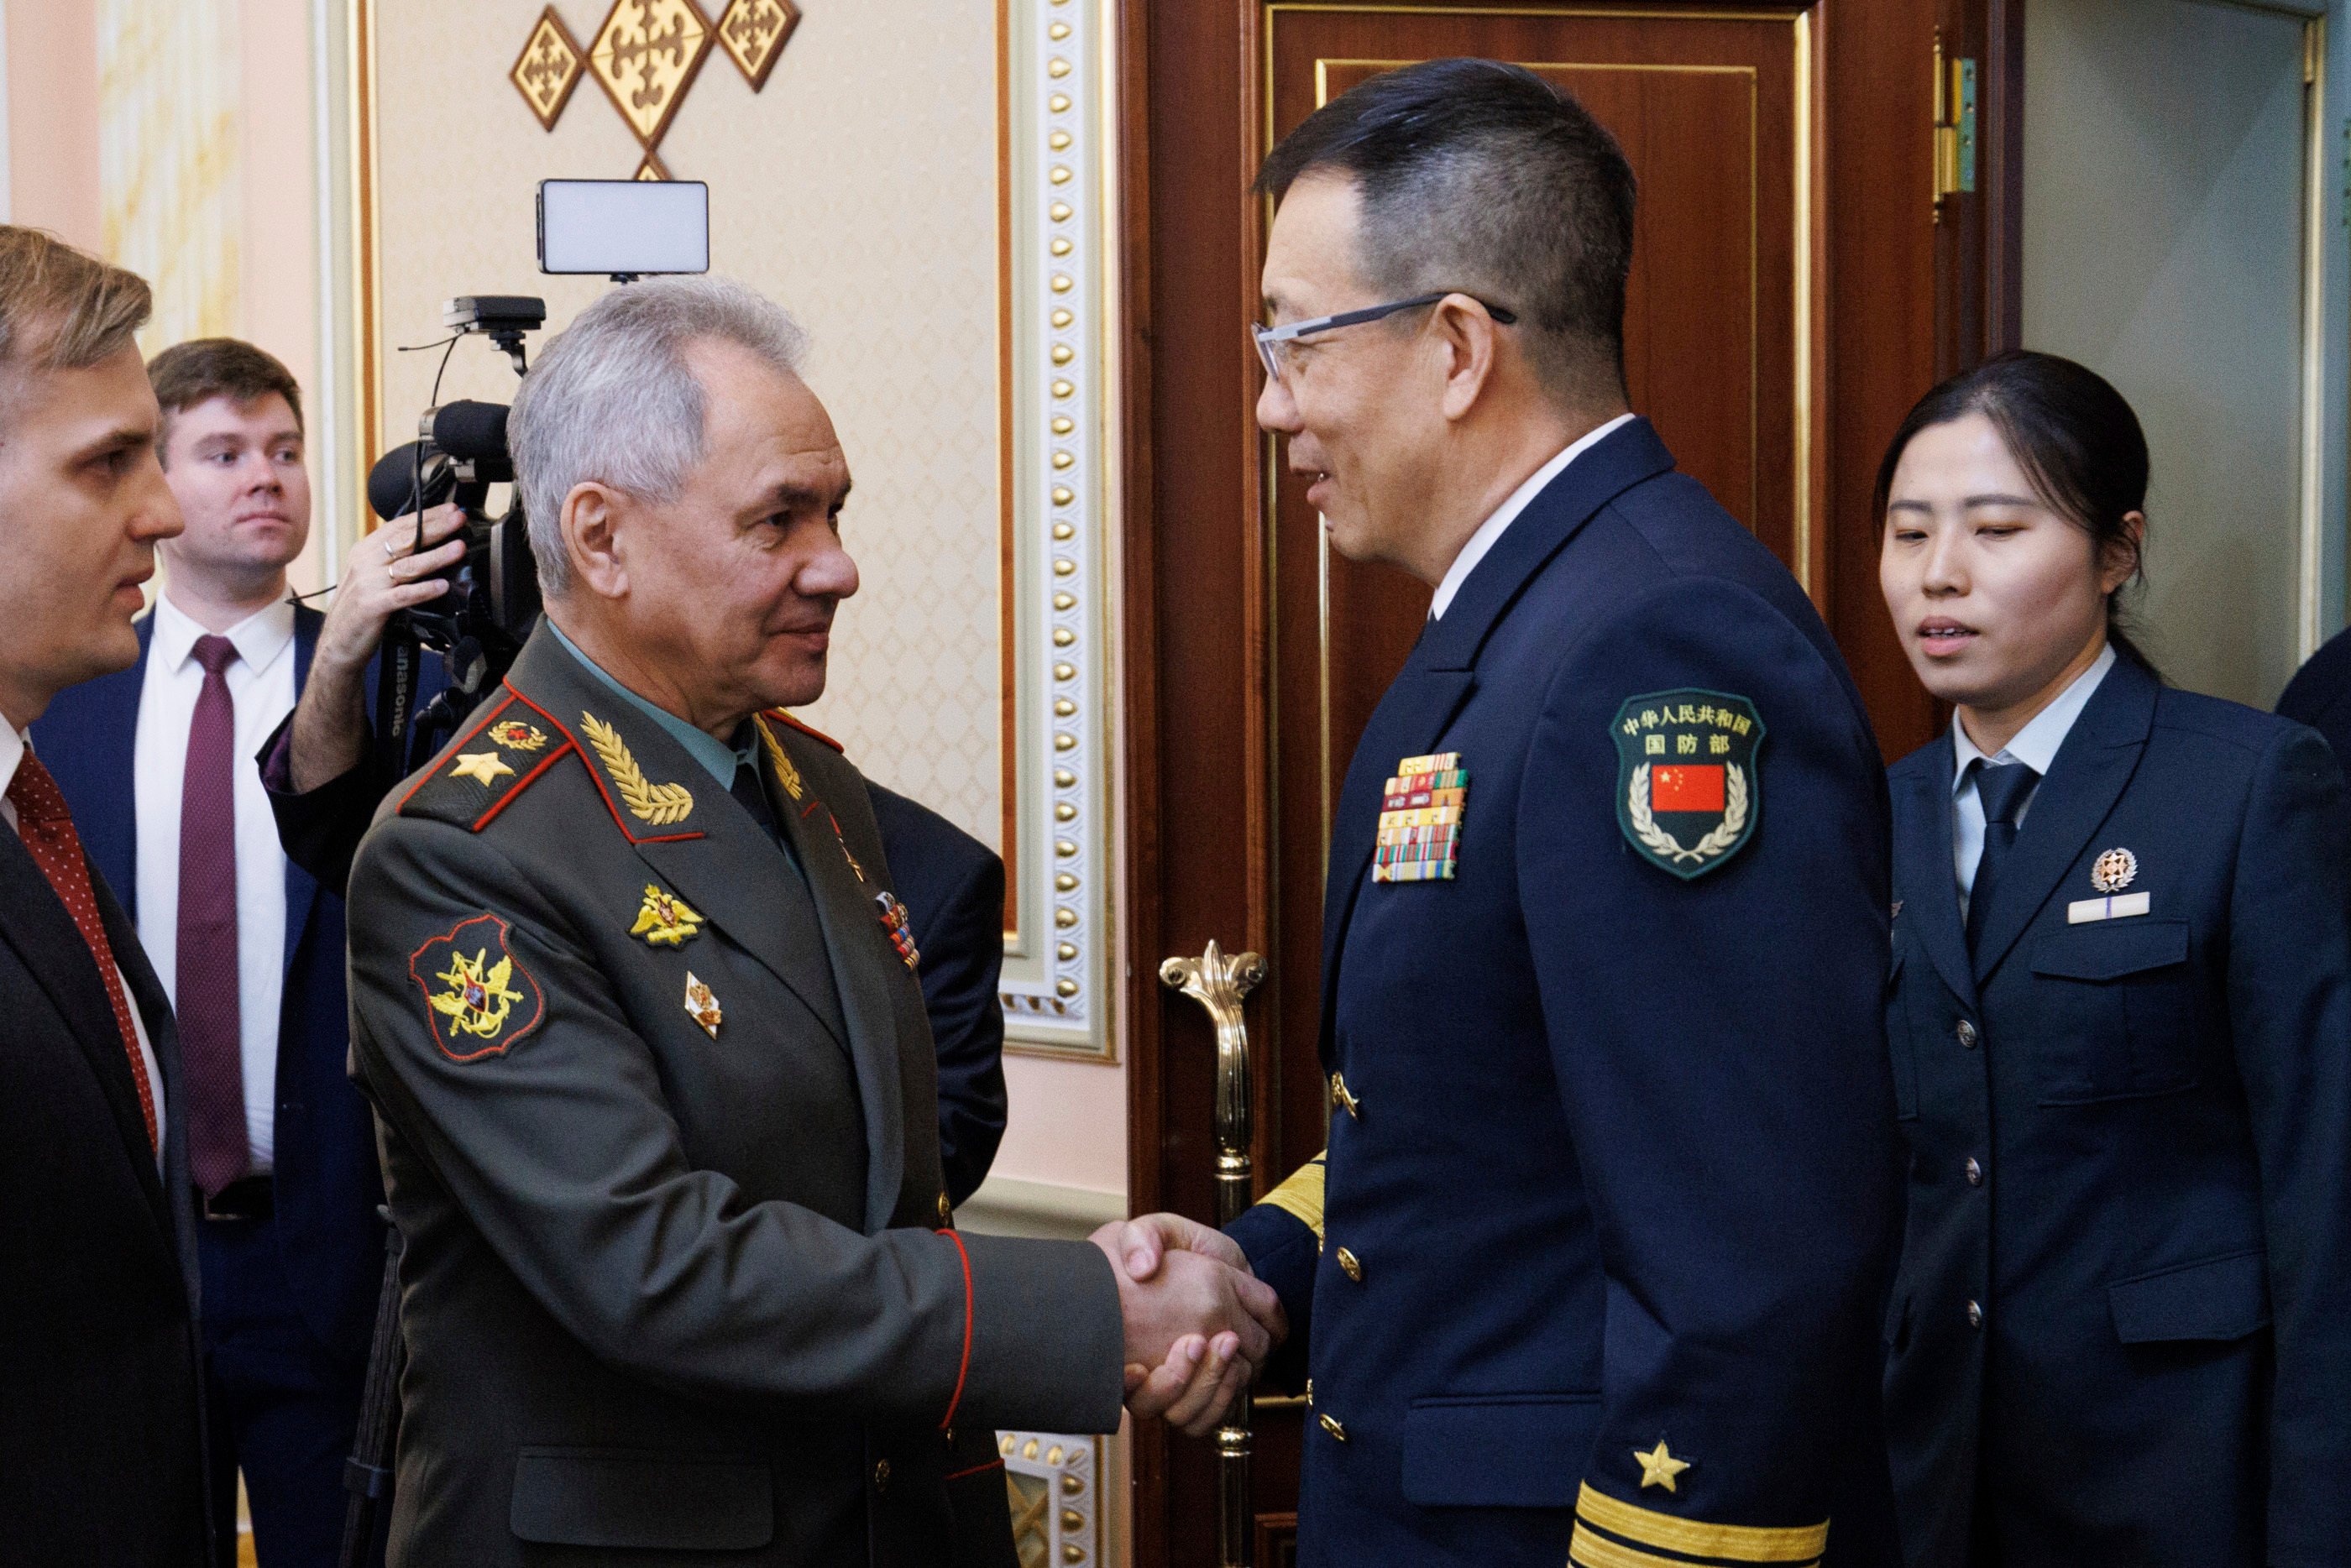 Russian Defense Minister Sergei Shoigu (left) greets Minister of National Defence of the People’s Republic of China Dong Jun on the sidelines of the Shanghai Cooperation Organisation in Astana, Kazakhstan, on Friday. Photo: Russian Defence Ministry Press Service via AP